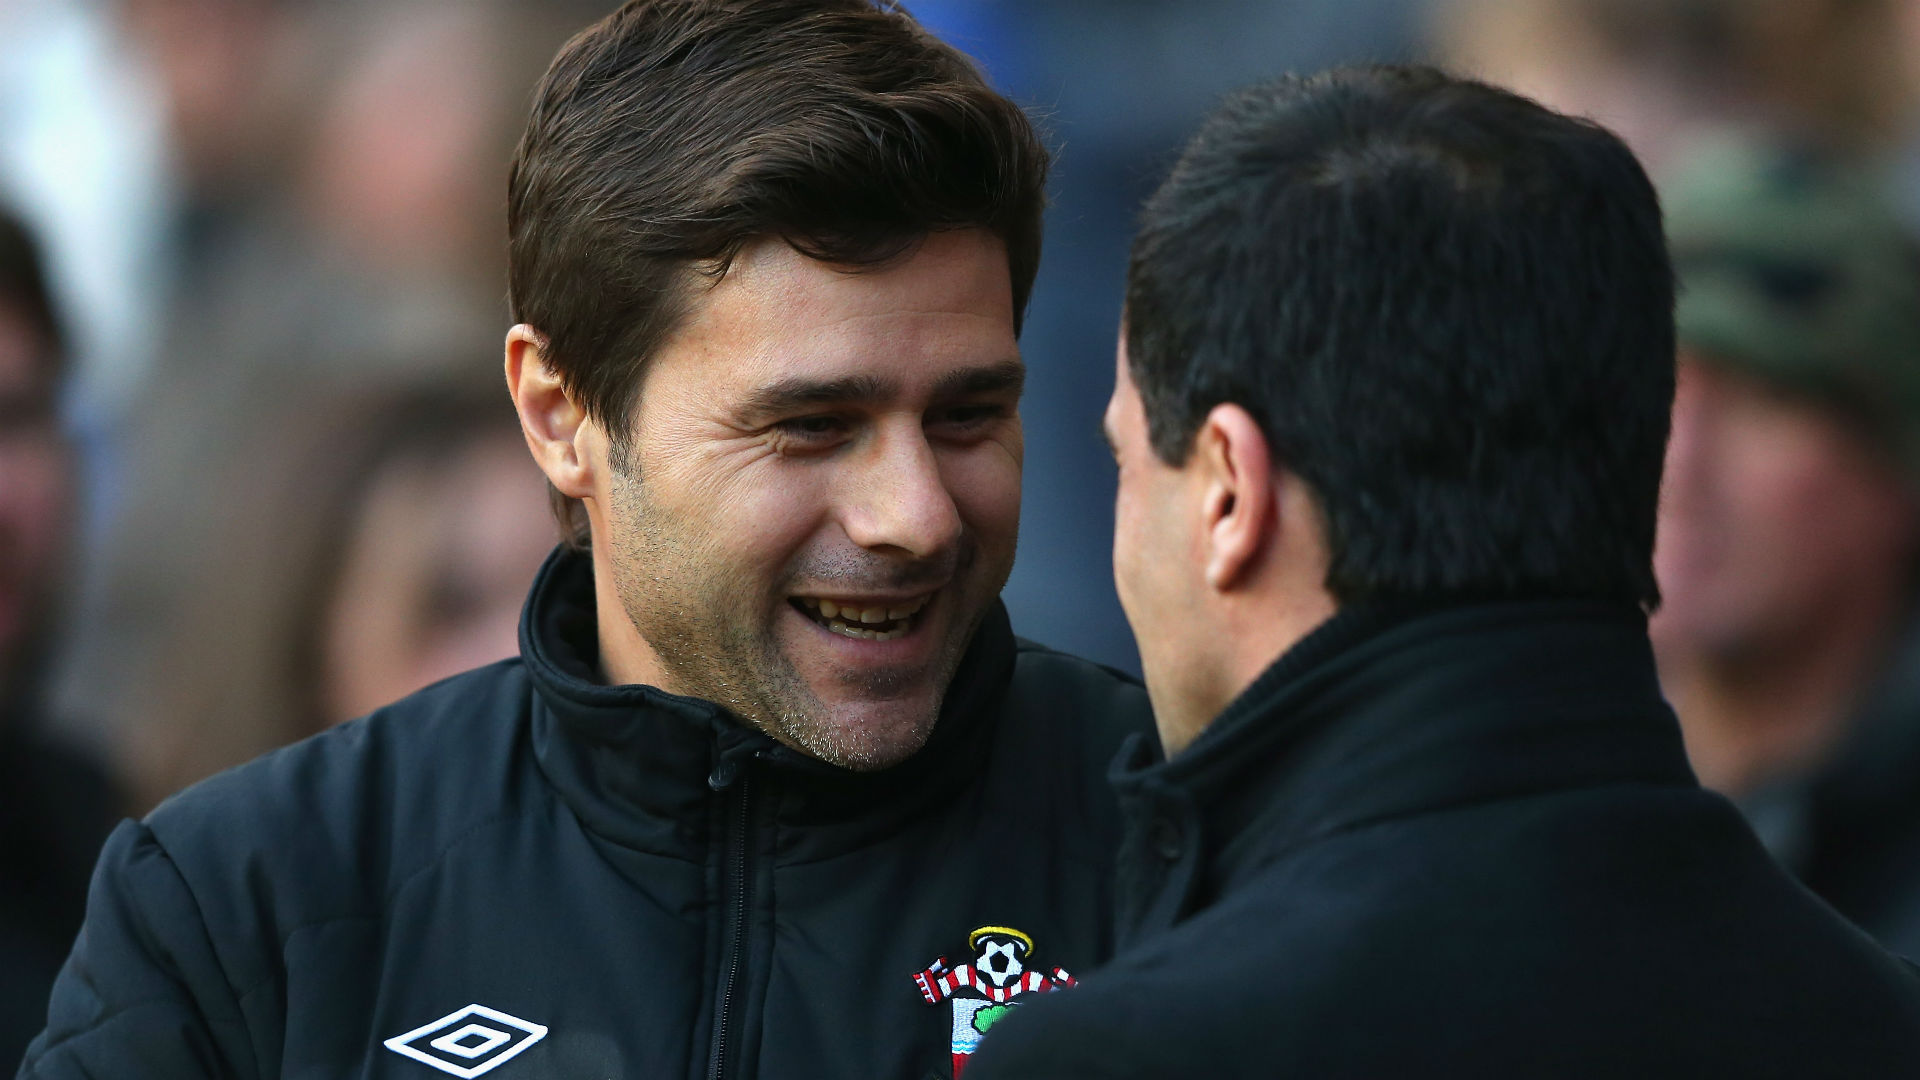 Southampton's transformation under Mauricio Pochettino marked a turning point for English football, says the Argentine tactician.